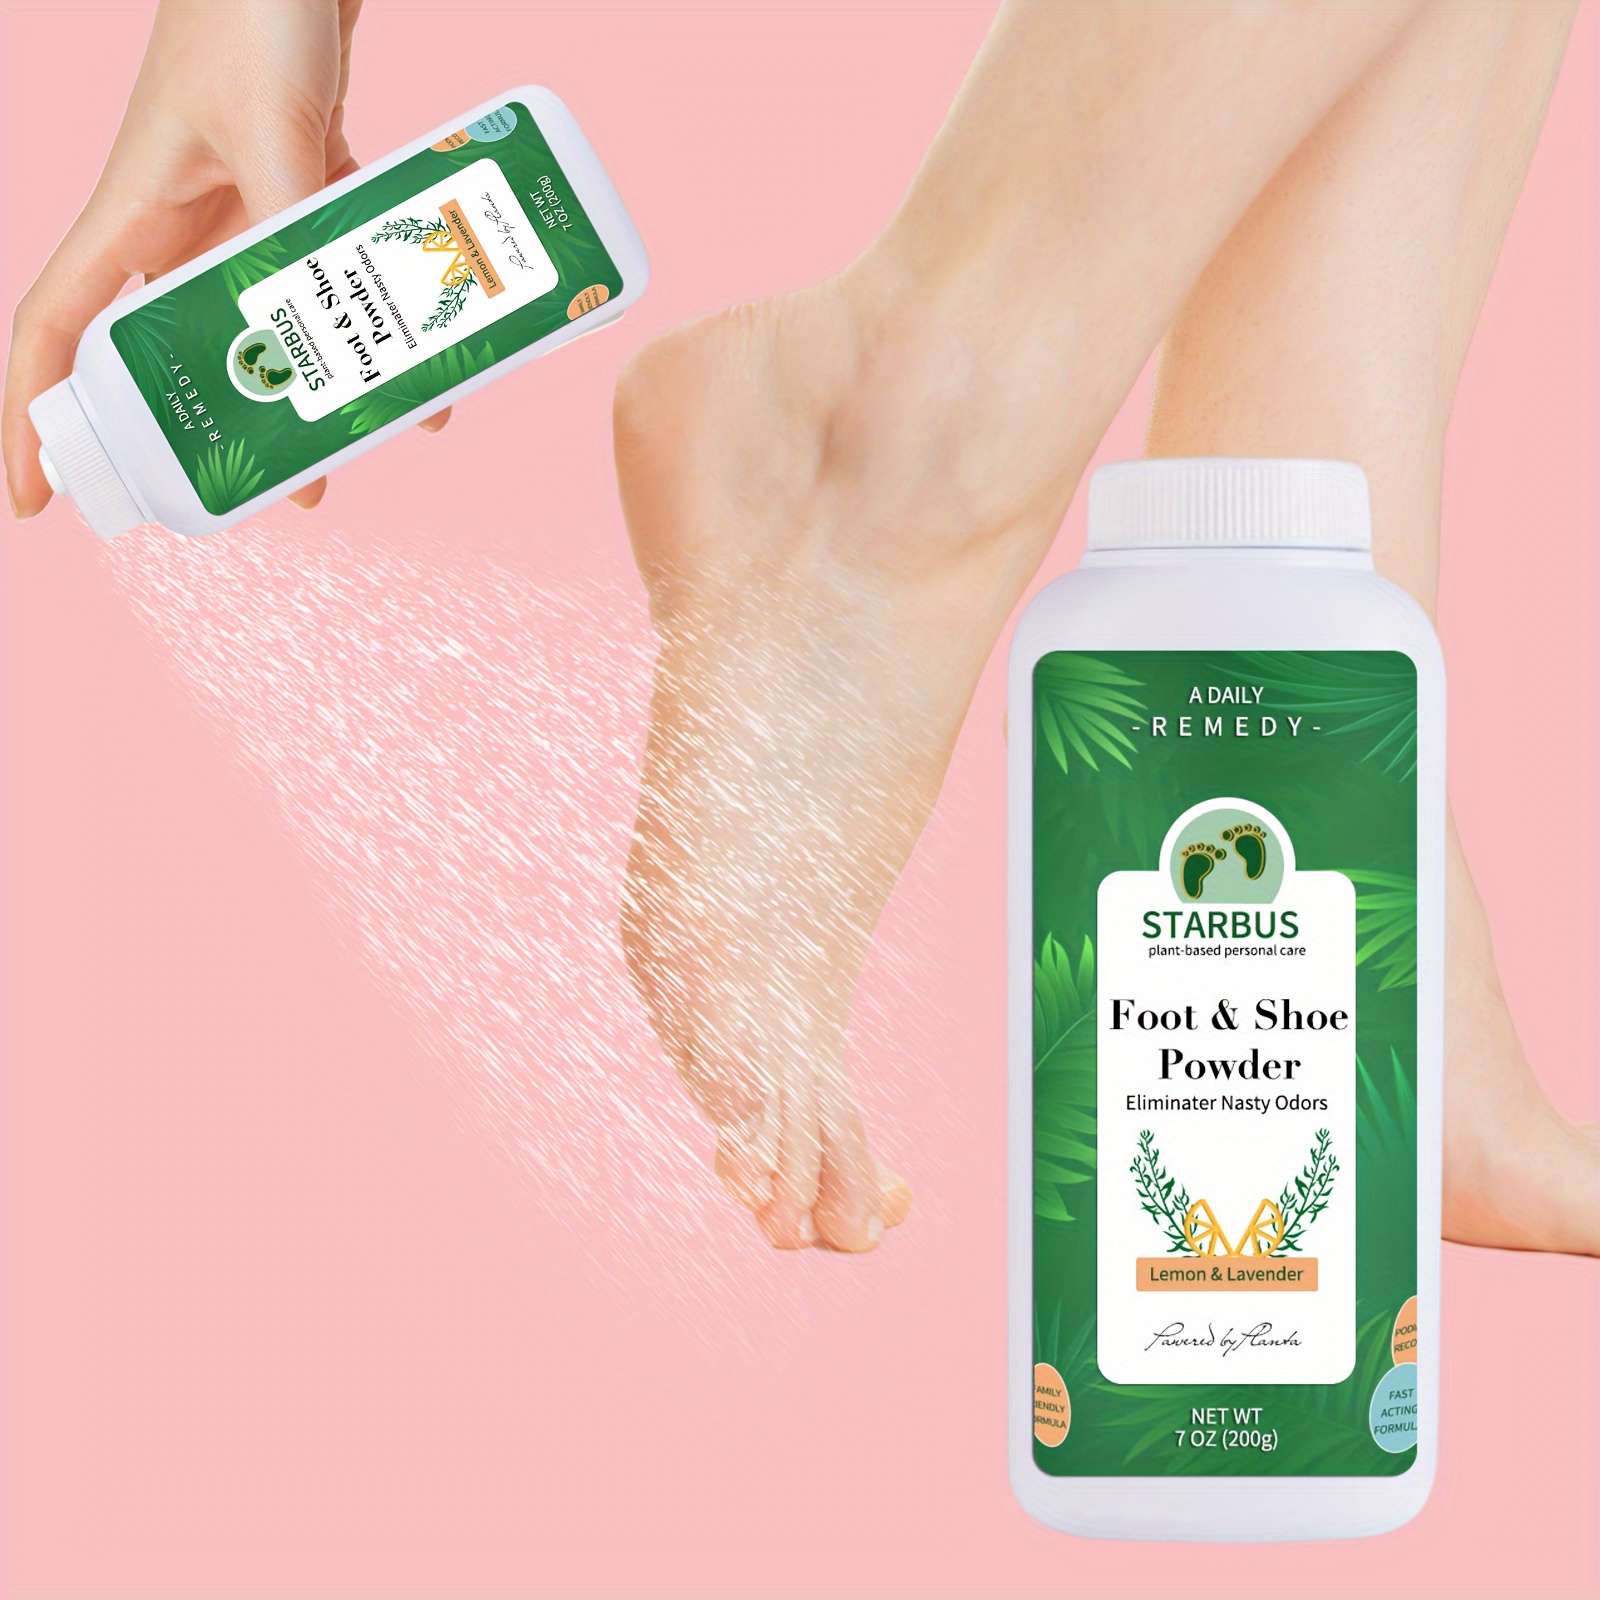 

200g Smelly Foot & Shoe Powder - Foot Odor Eliminator Lasts Up To 6 Months, Natural Formula For Smelly Shoes And Stinky Feet